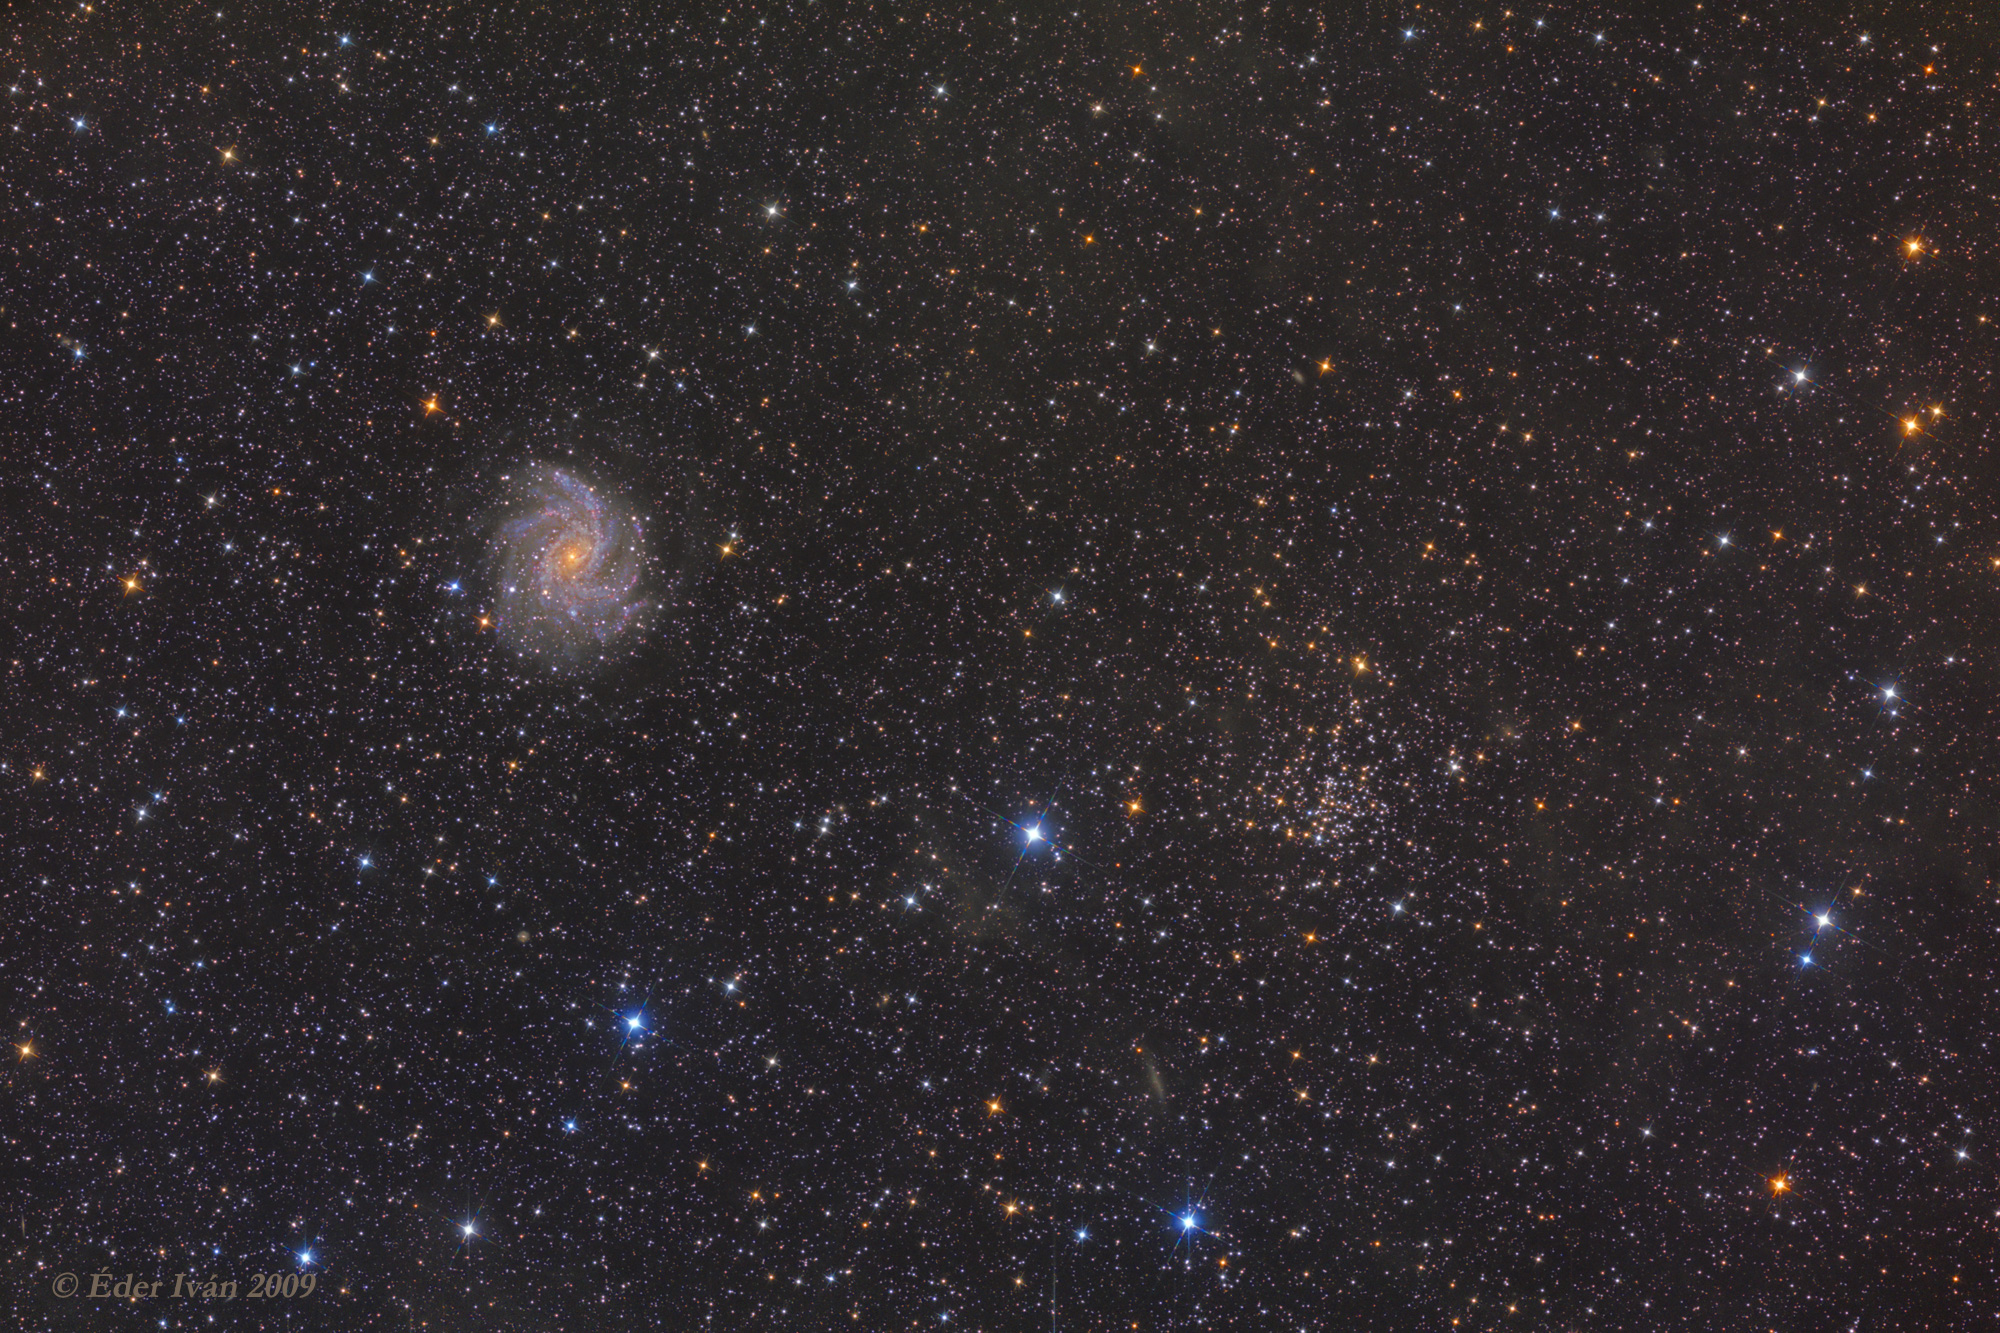 The pair of NGC 6946-6939